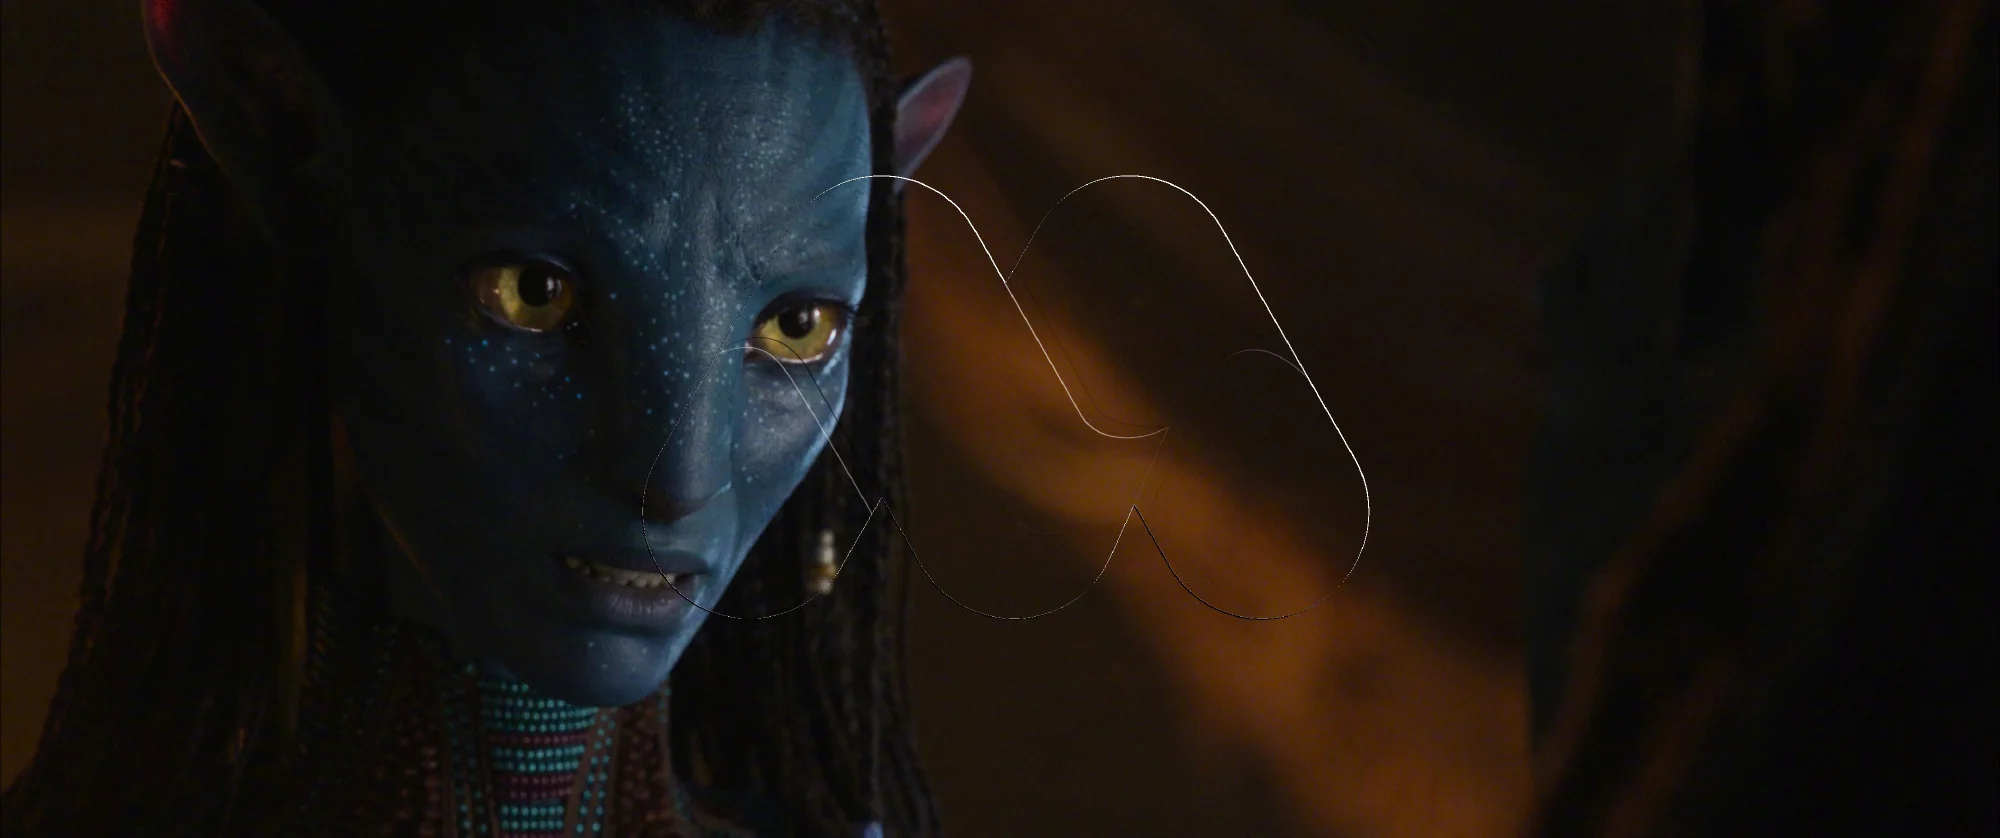 avatar-the-way-of-water-exposes-massive-new-stills-4